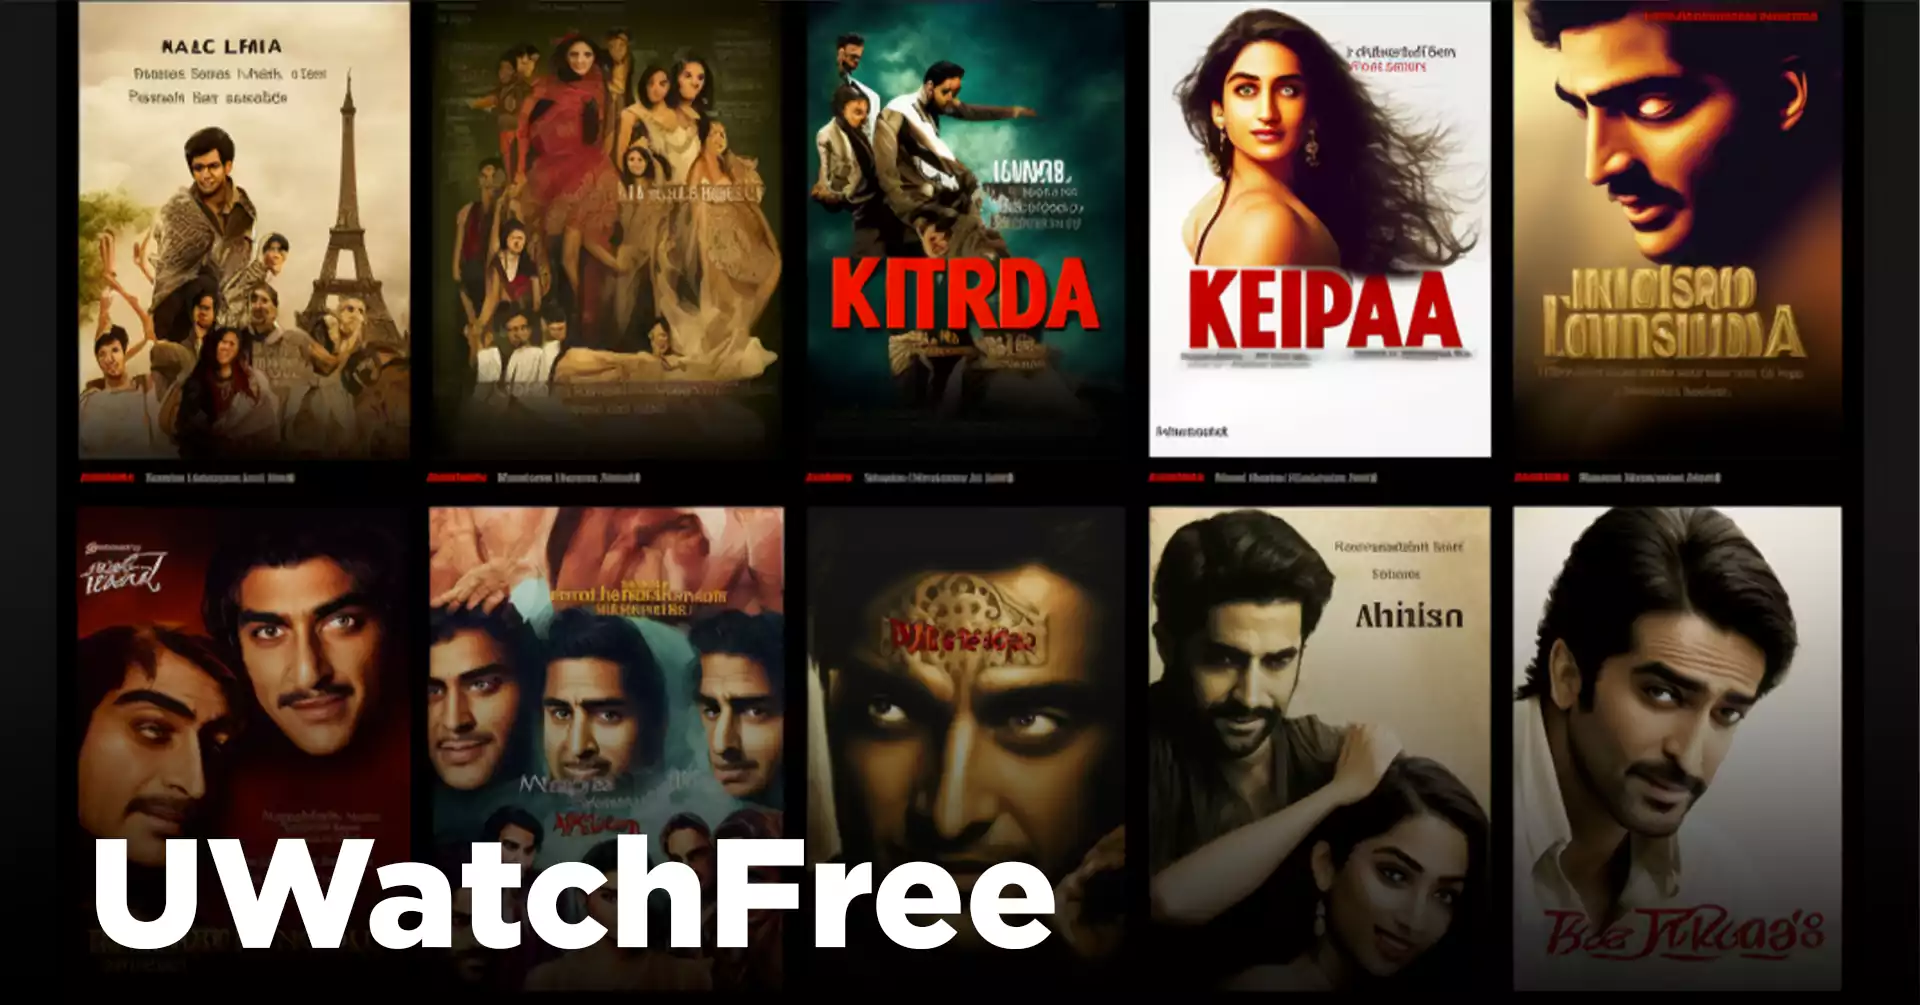 Uwatchfree 2023 Latest HD Bollywood, Hollywood pictures Online Free Download & Watch uwatchfree.com